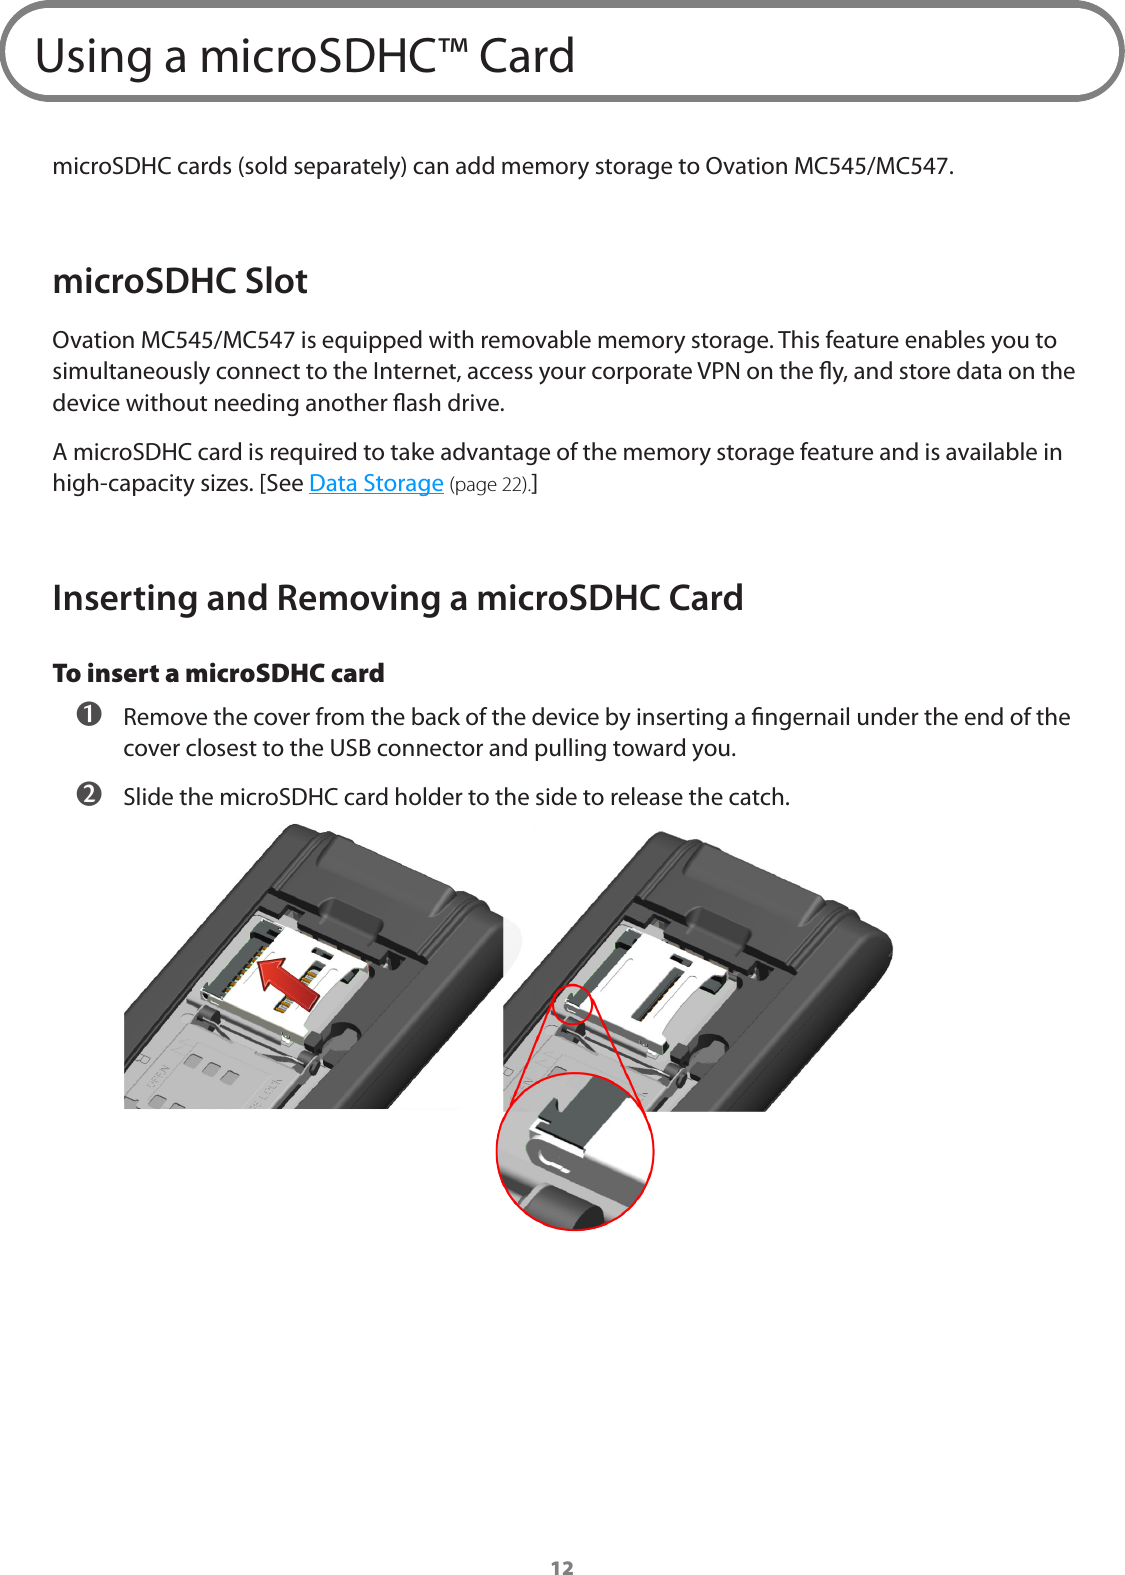 12Using a microSDHC™ CardmicroSDHC cards (sold separately) can add memory storage to Ovation MC545/MC547.microSDHC SlotOvation MC545/MC547 is equipped with removable memory storage. This feature enables you to simultaneously connect to the Internet, access your corporate VPN on the y, and store data on the device without needing another ash drive.A microSDHC card is required to take advantage of the memory storage feature and is available in high-capacity sizes. [See Data Storage (page 22).]Inserting and Removing a microSDHC CardTo insert a microSDHC card  Remove the cover from the back of the device by inserting a ngernail under the end of the cover closest to the USB connector and pulling toward you.  Slide the microSDHC card holder to the side to release the catch.